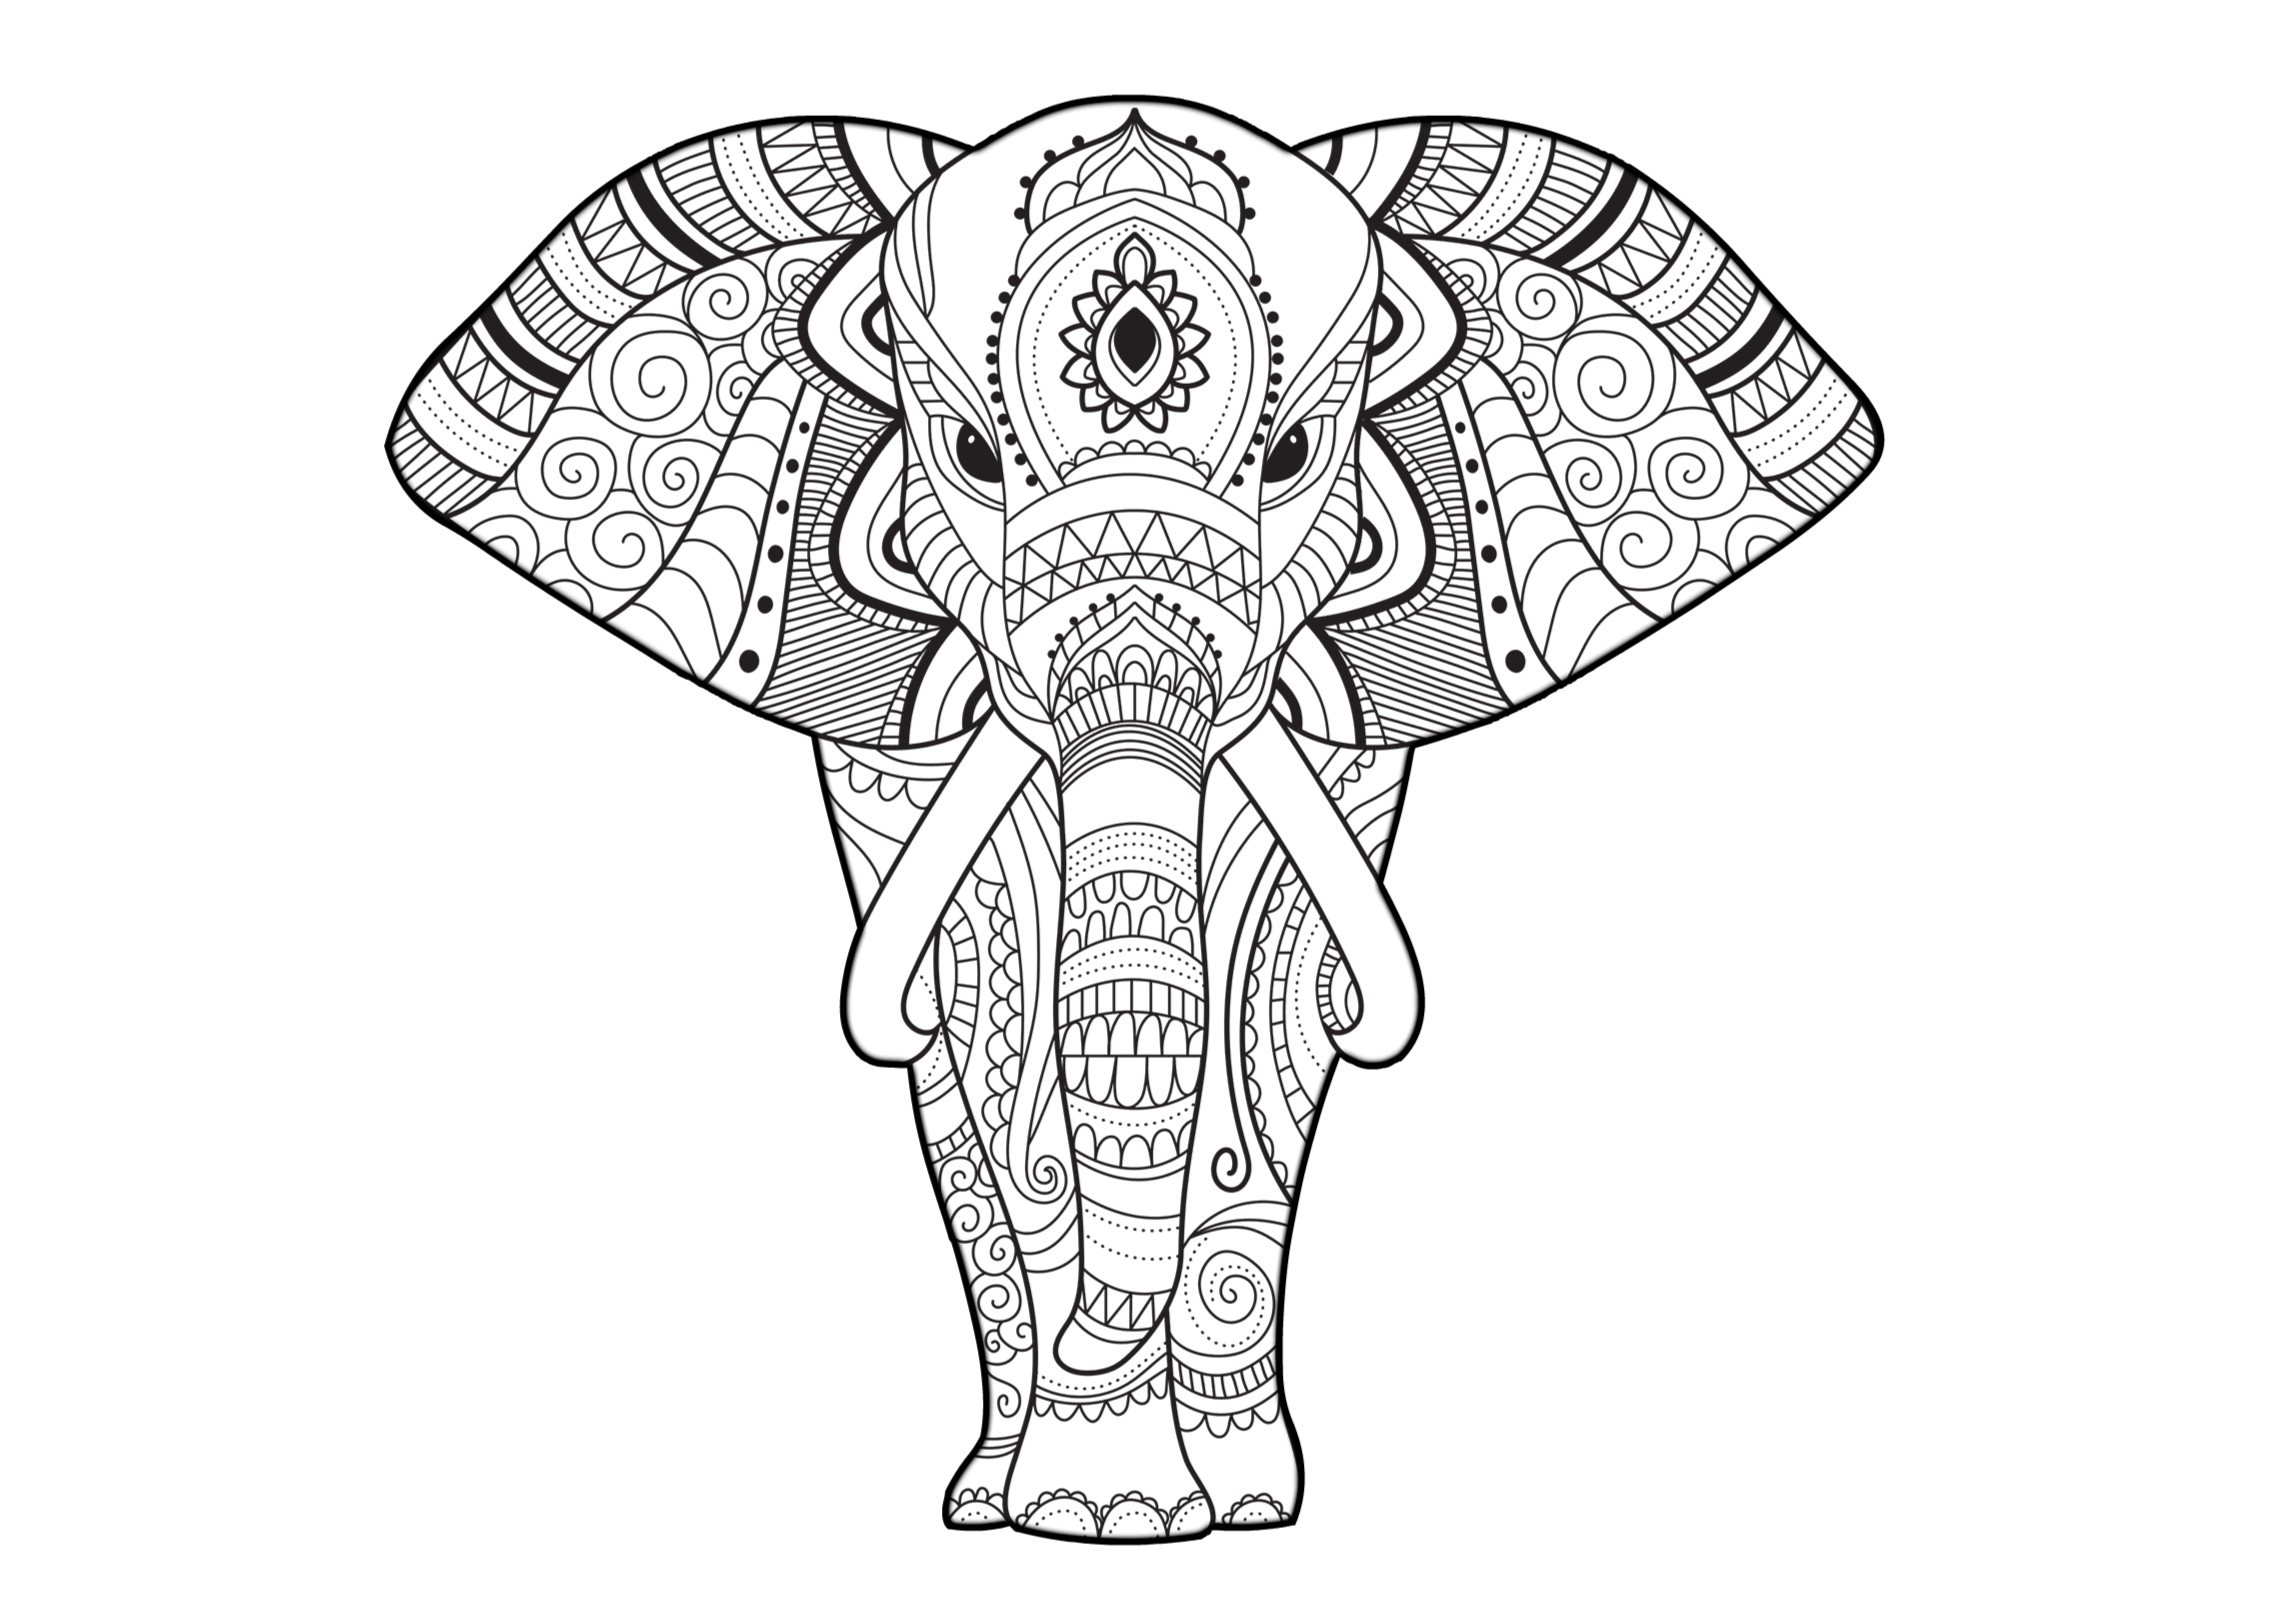 Download Hard to Color Elephant Mandala Coloring Pages for Adults - Print Color Craft